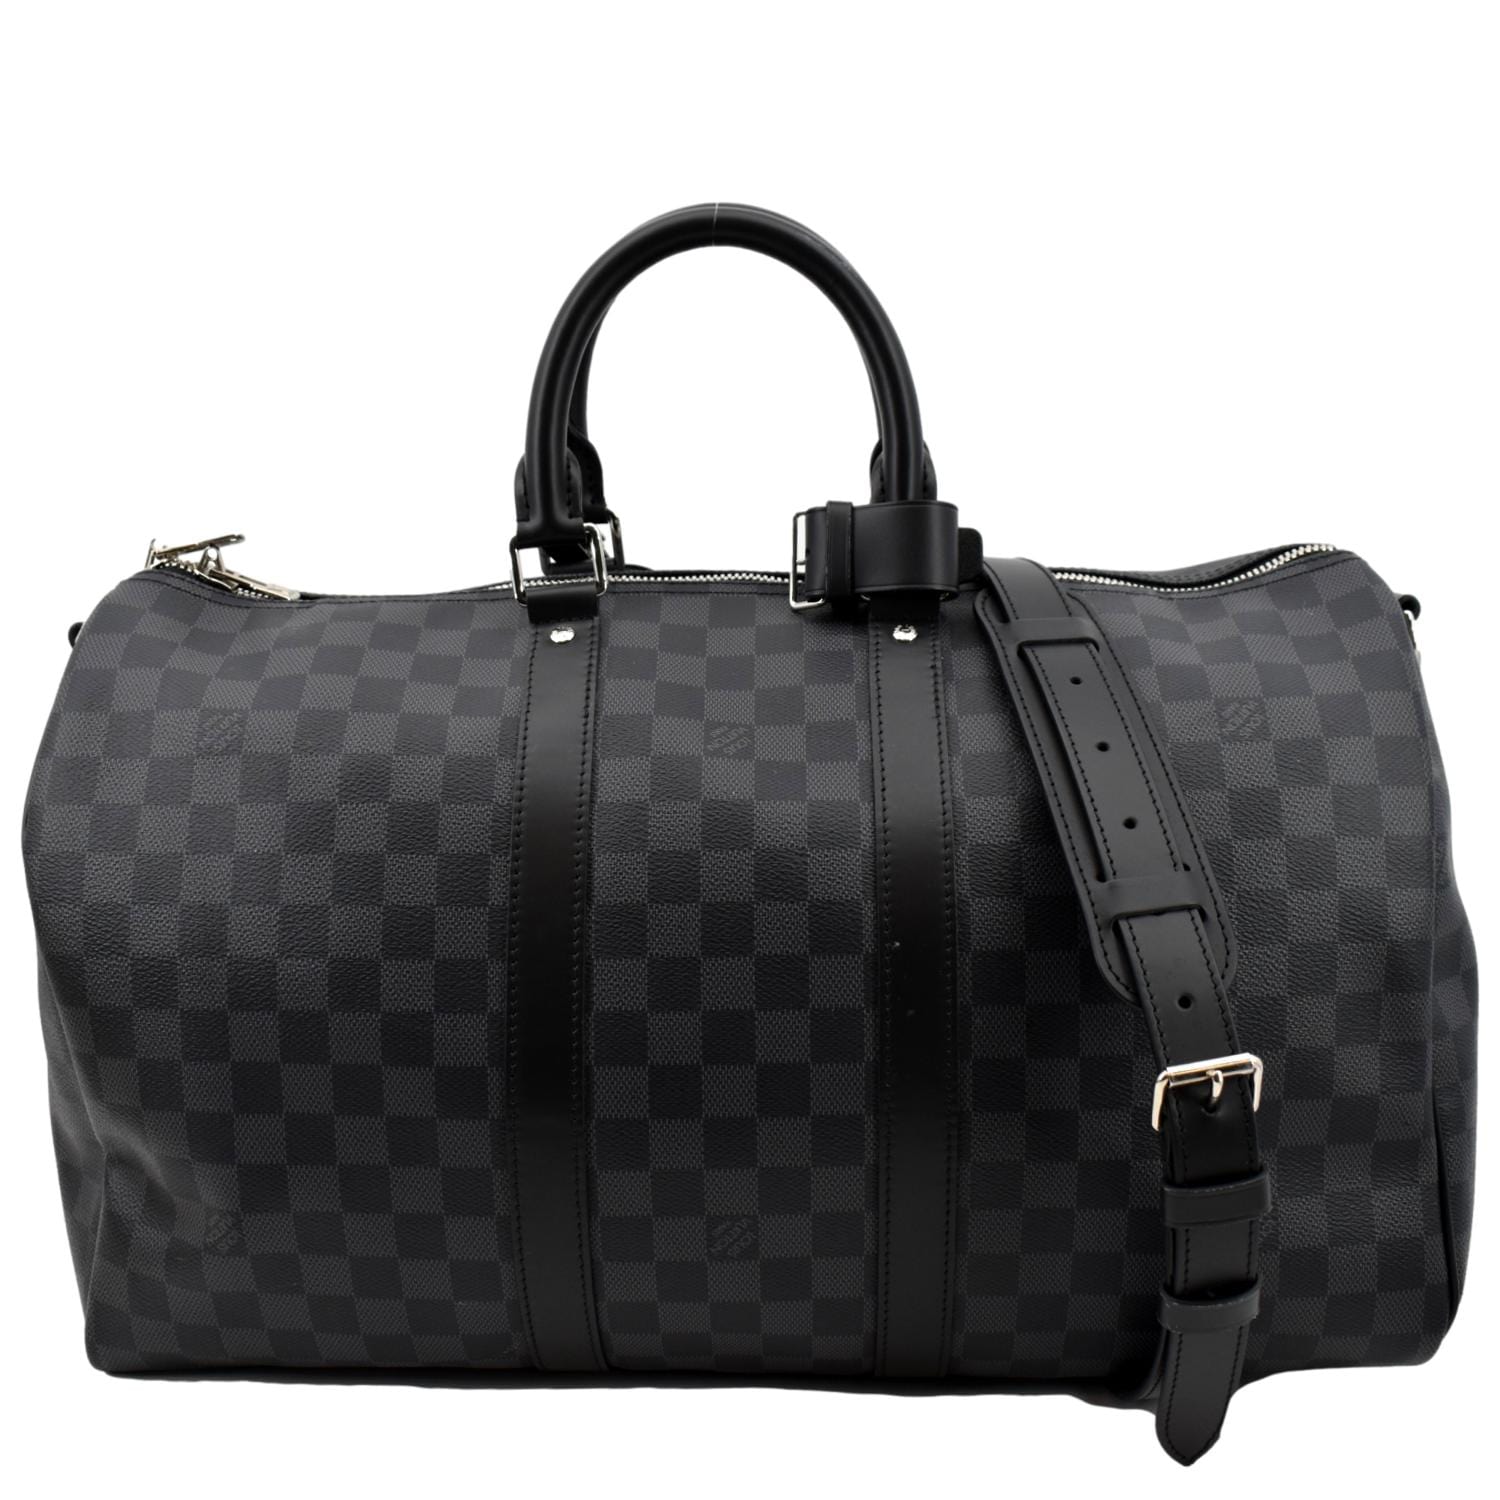 lv duffel bags for traveling